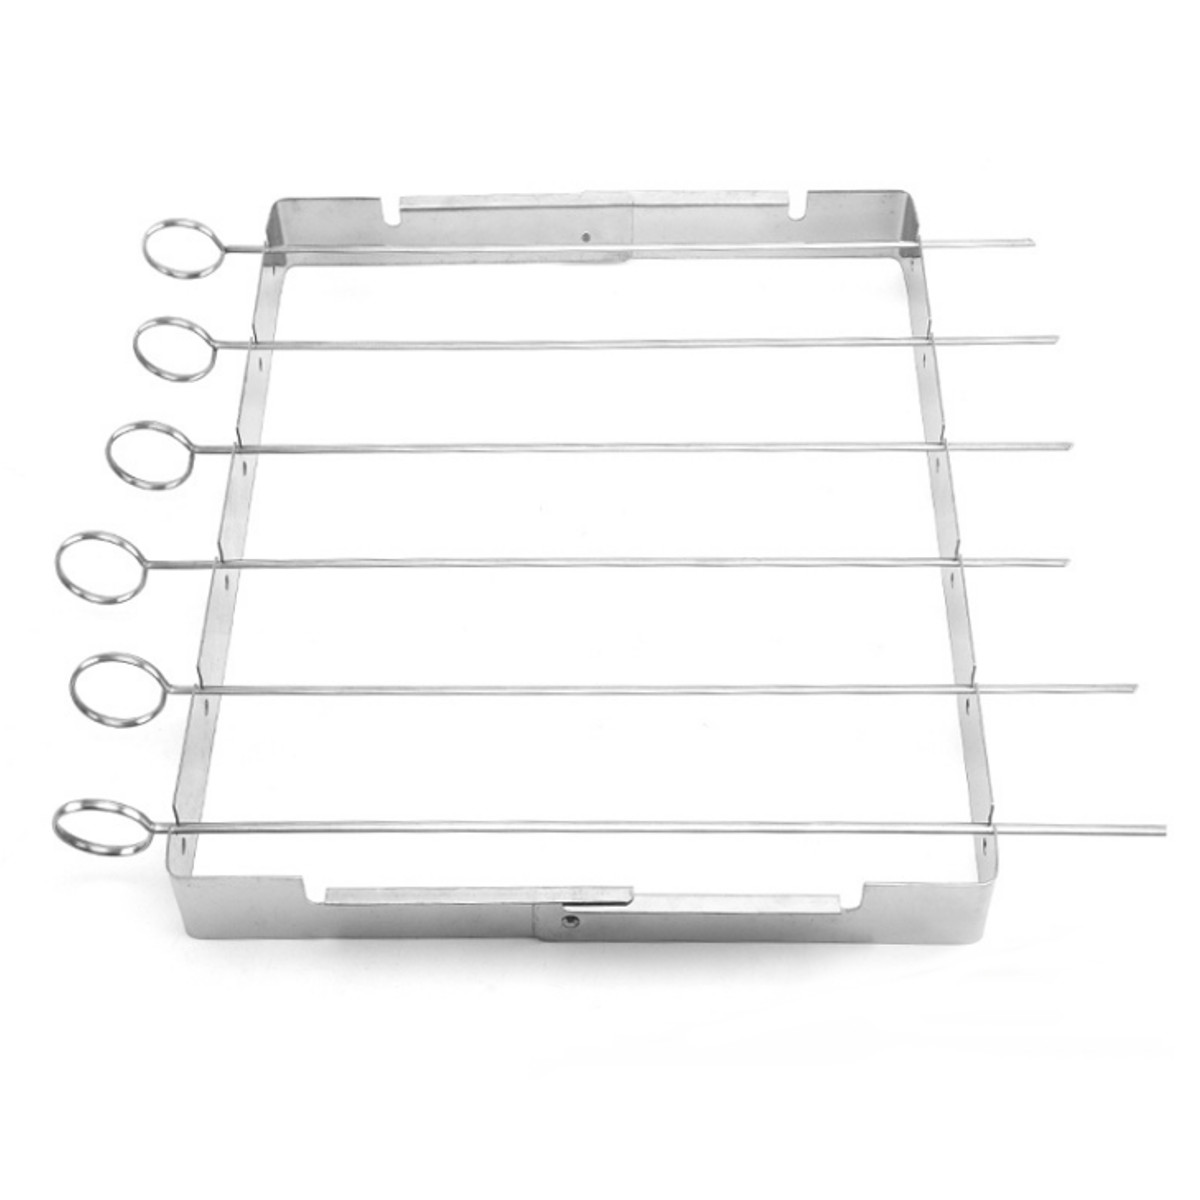 Portable-Barbecue-BBQ-Rack-Stainless-Steel-Skewer-Meat-Foods-Grill-Camping-Tool-1753748